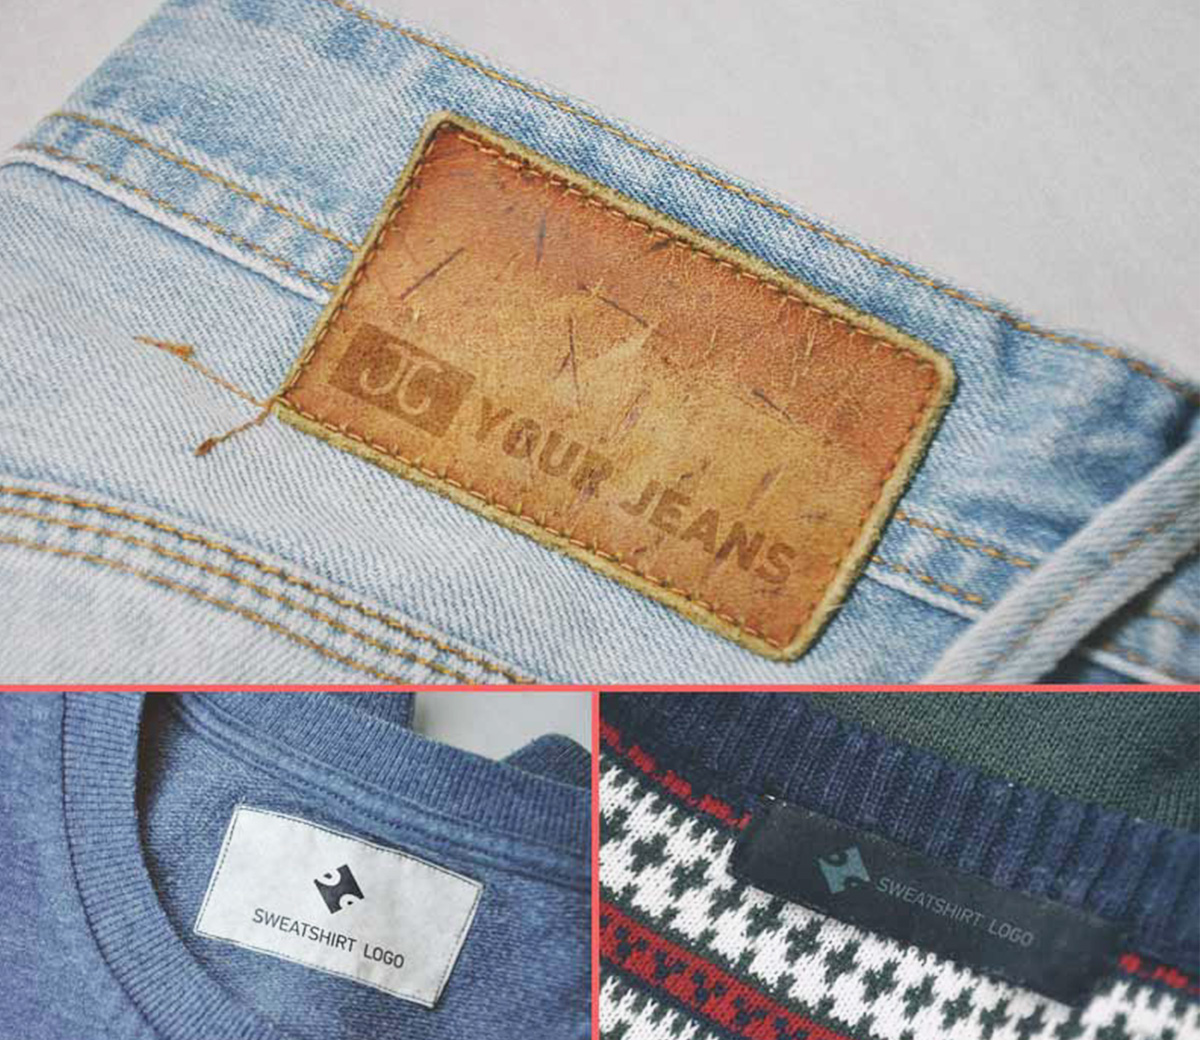 Download free-clothes-label-mockup